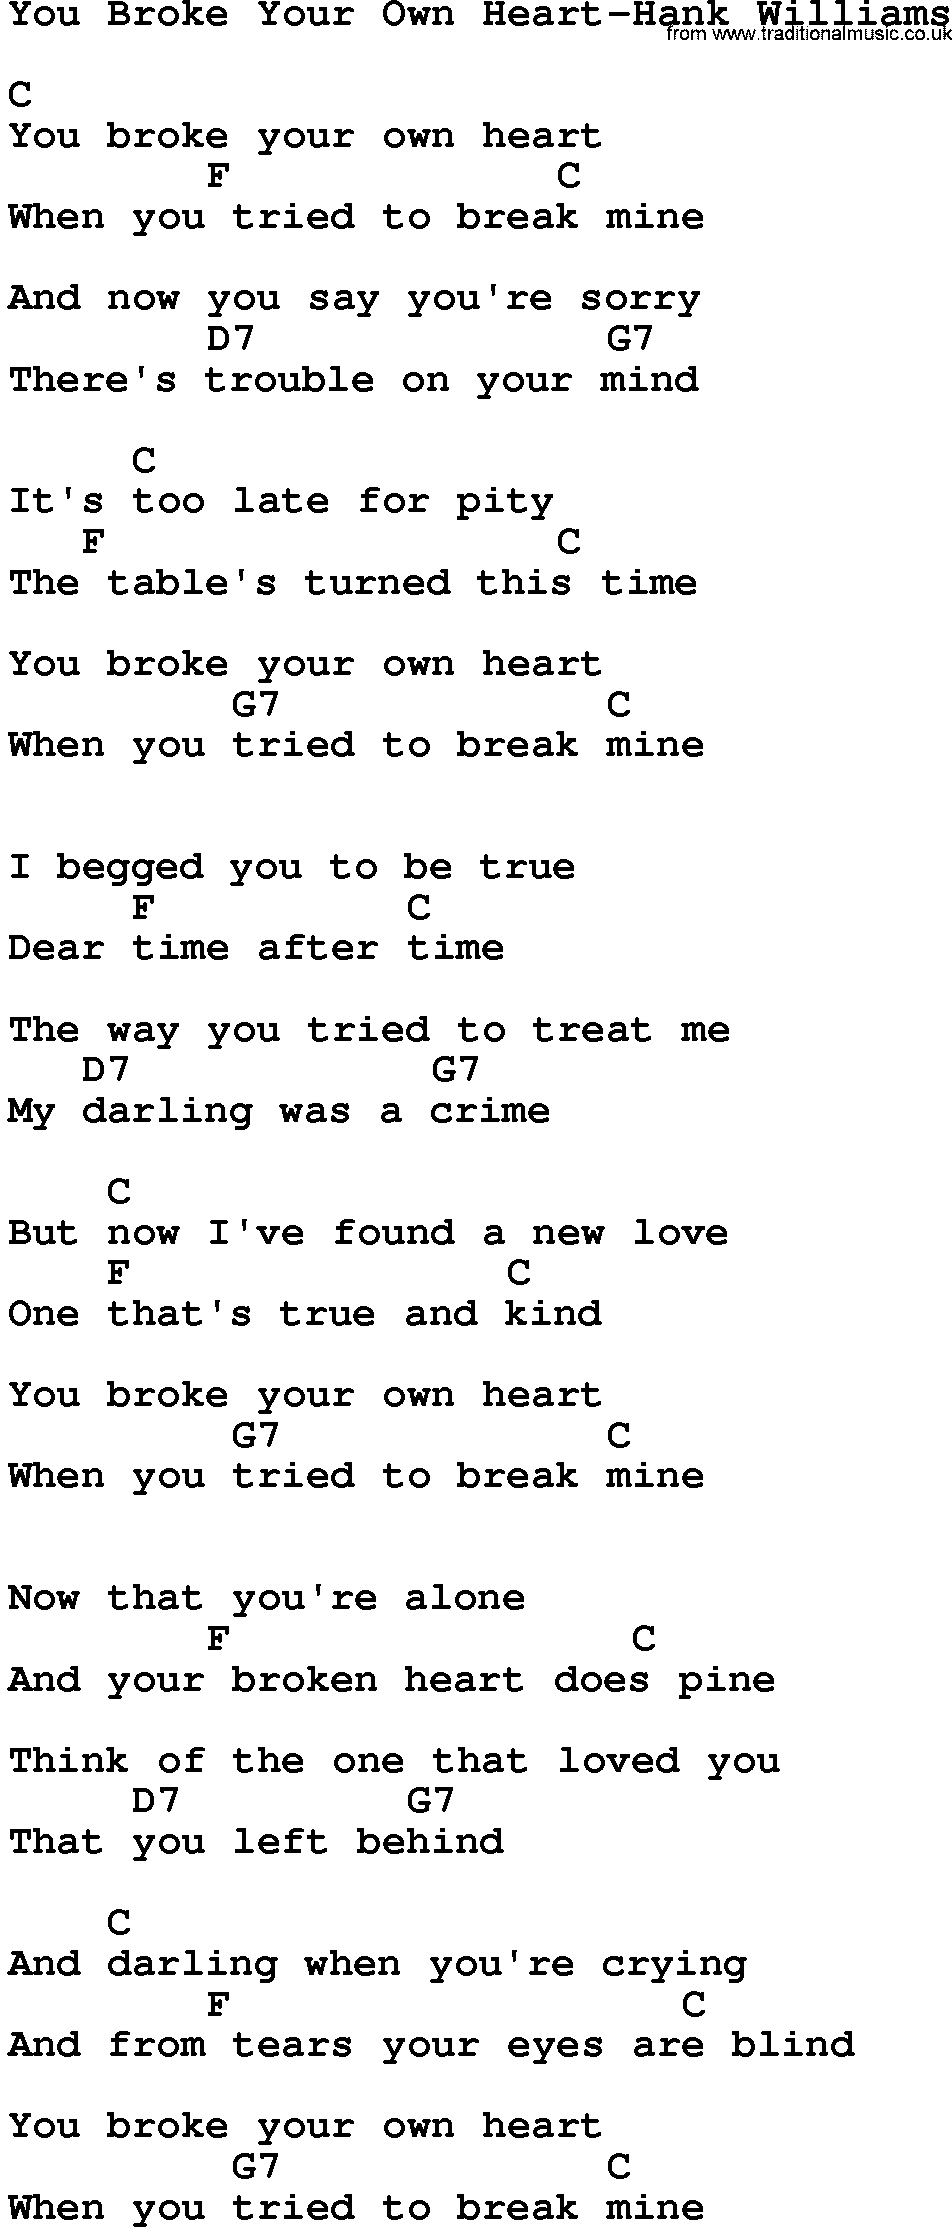 Country music song: You Broke Your Own Heart-Hank Williams lyrics and chords